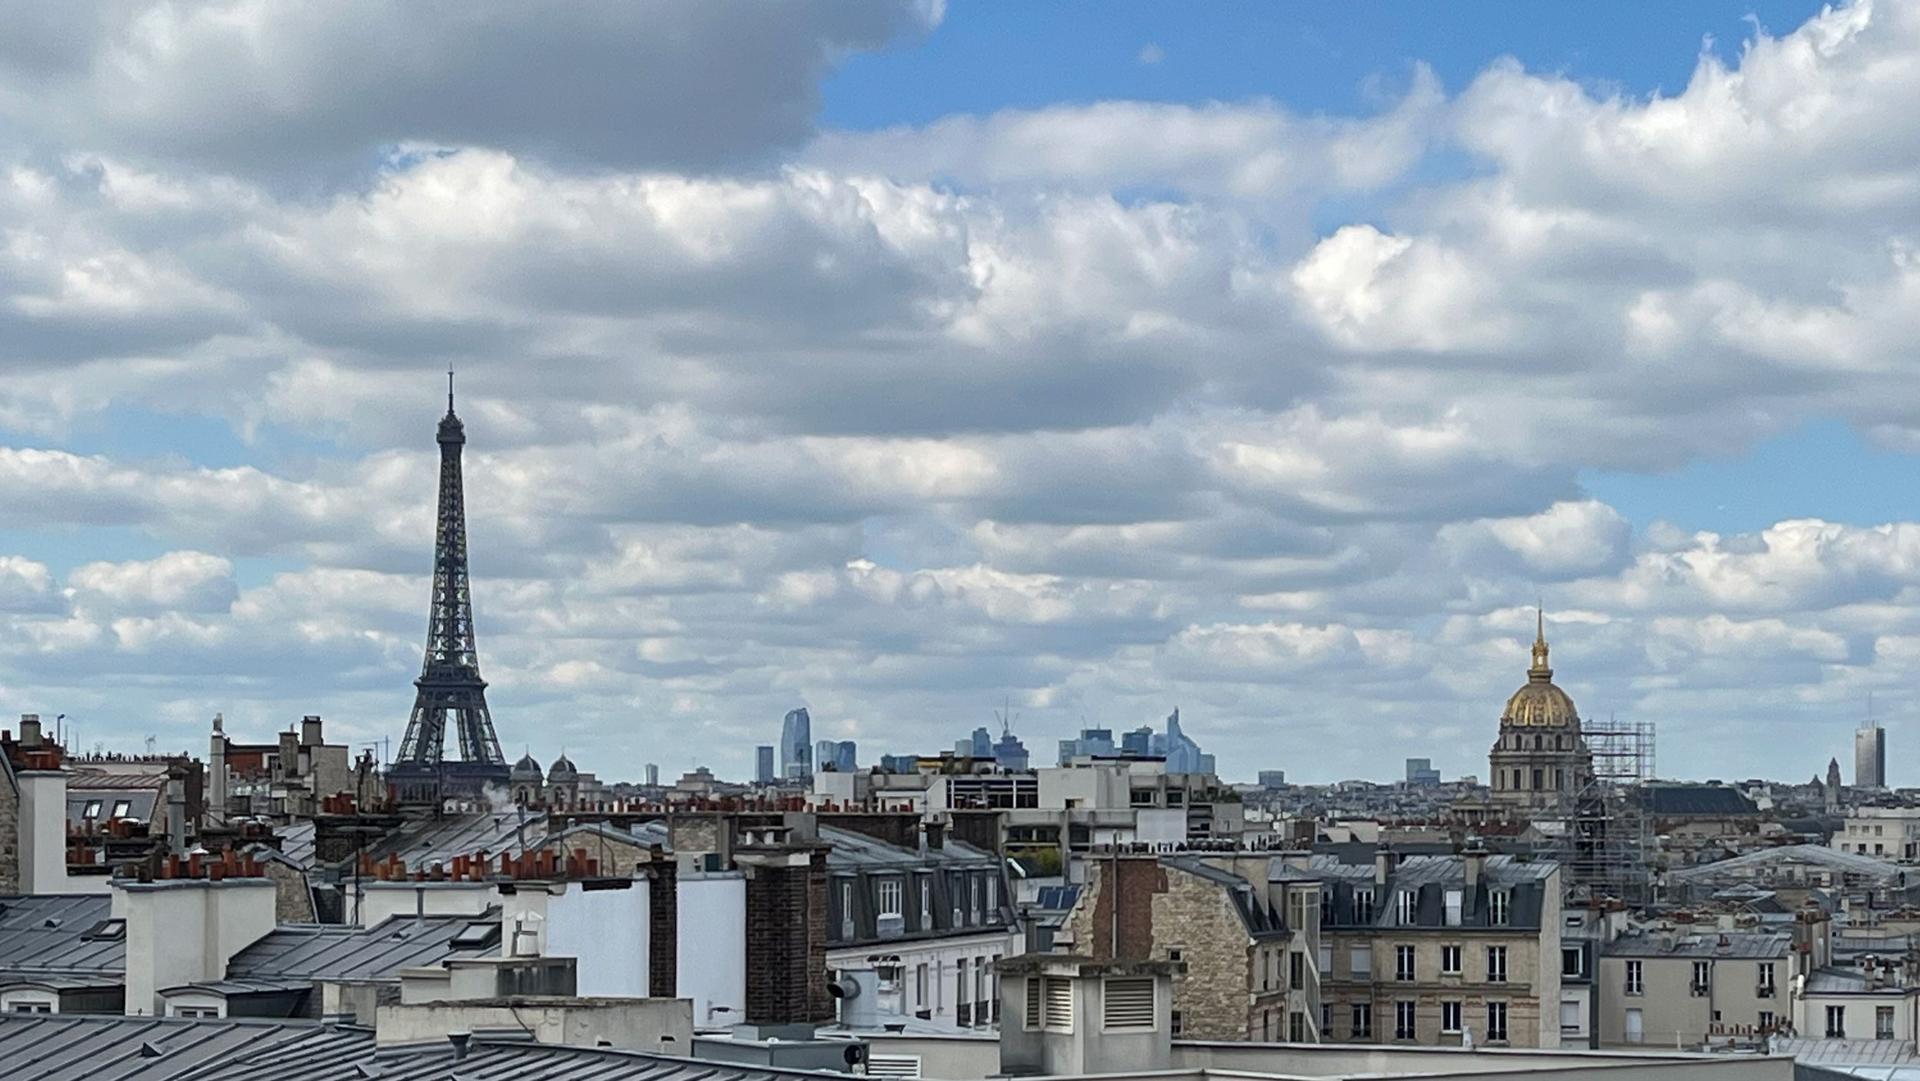 A view of Paris, France, with the iconic Eiffel Tower in the distance.